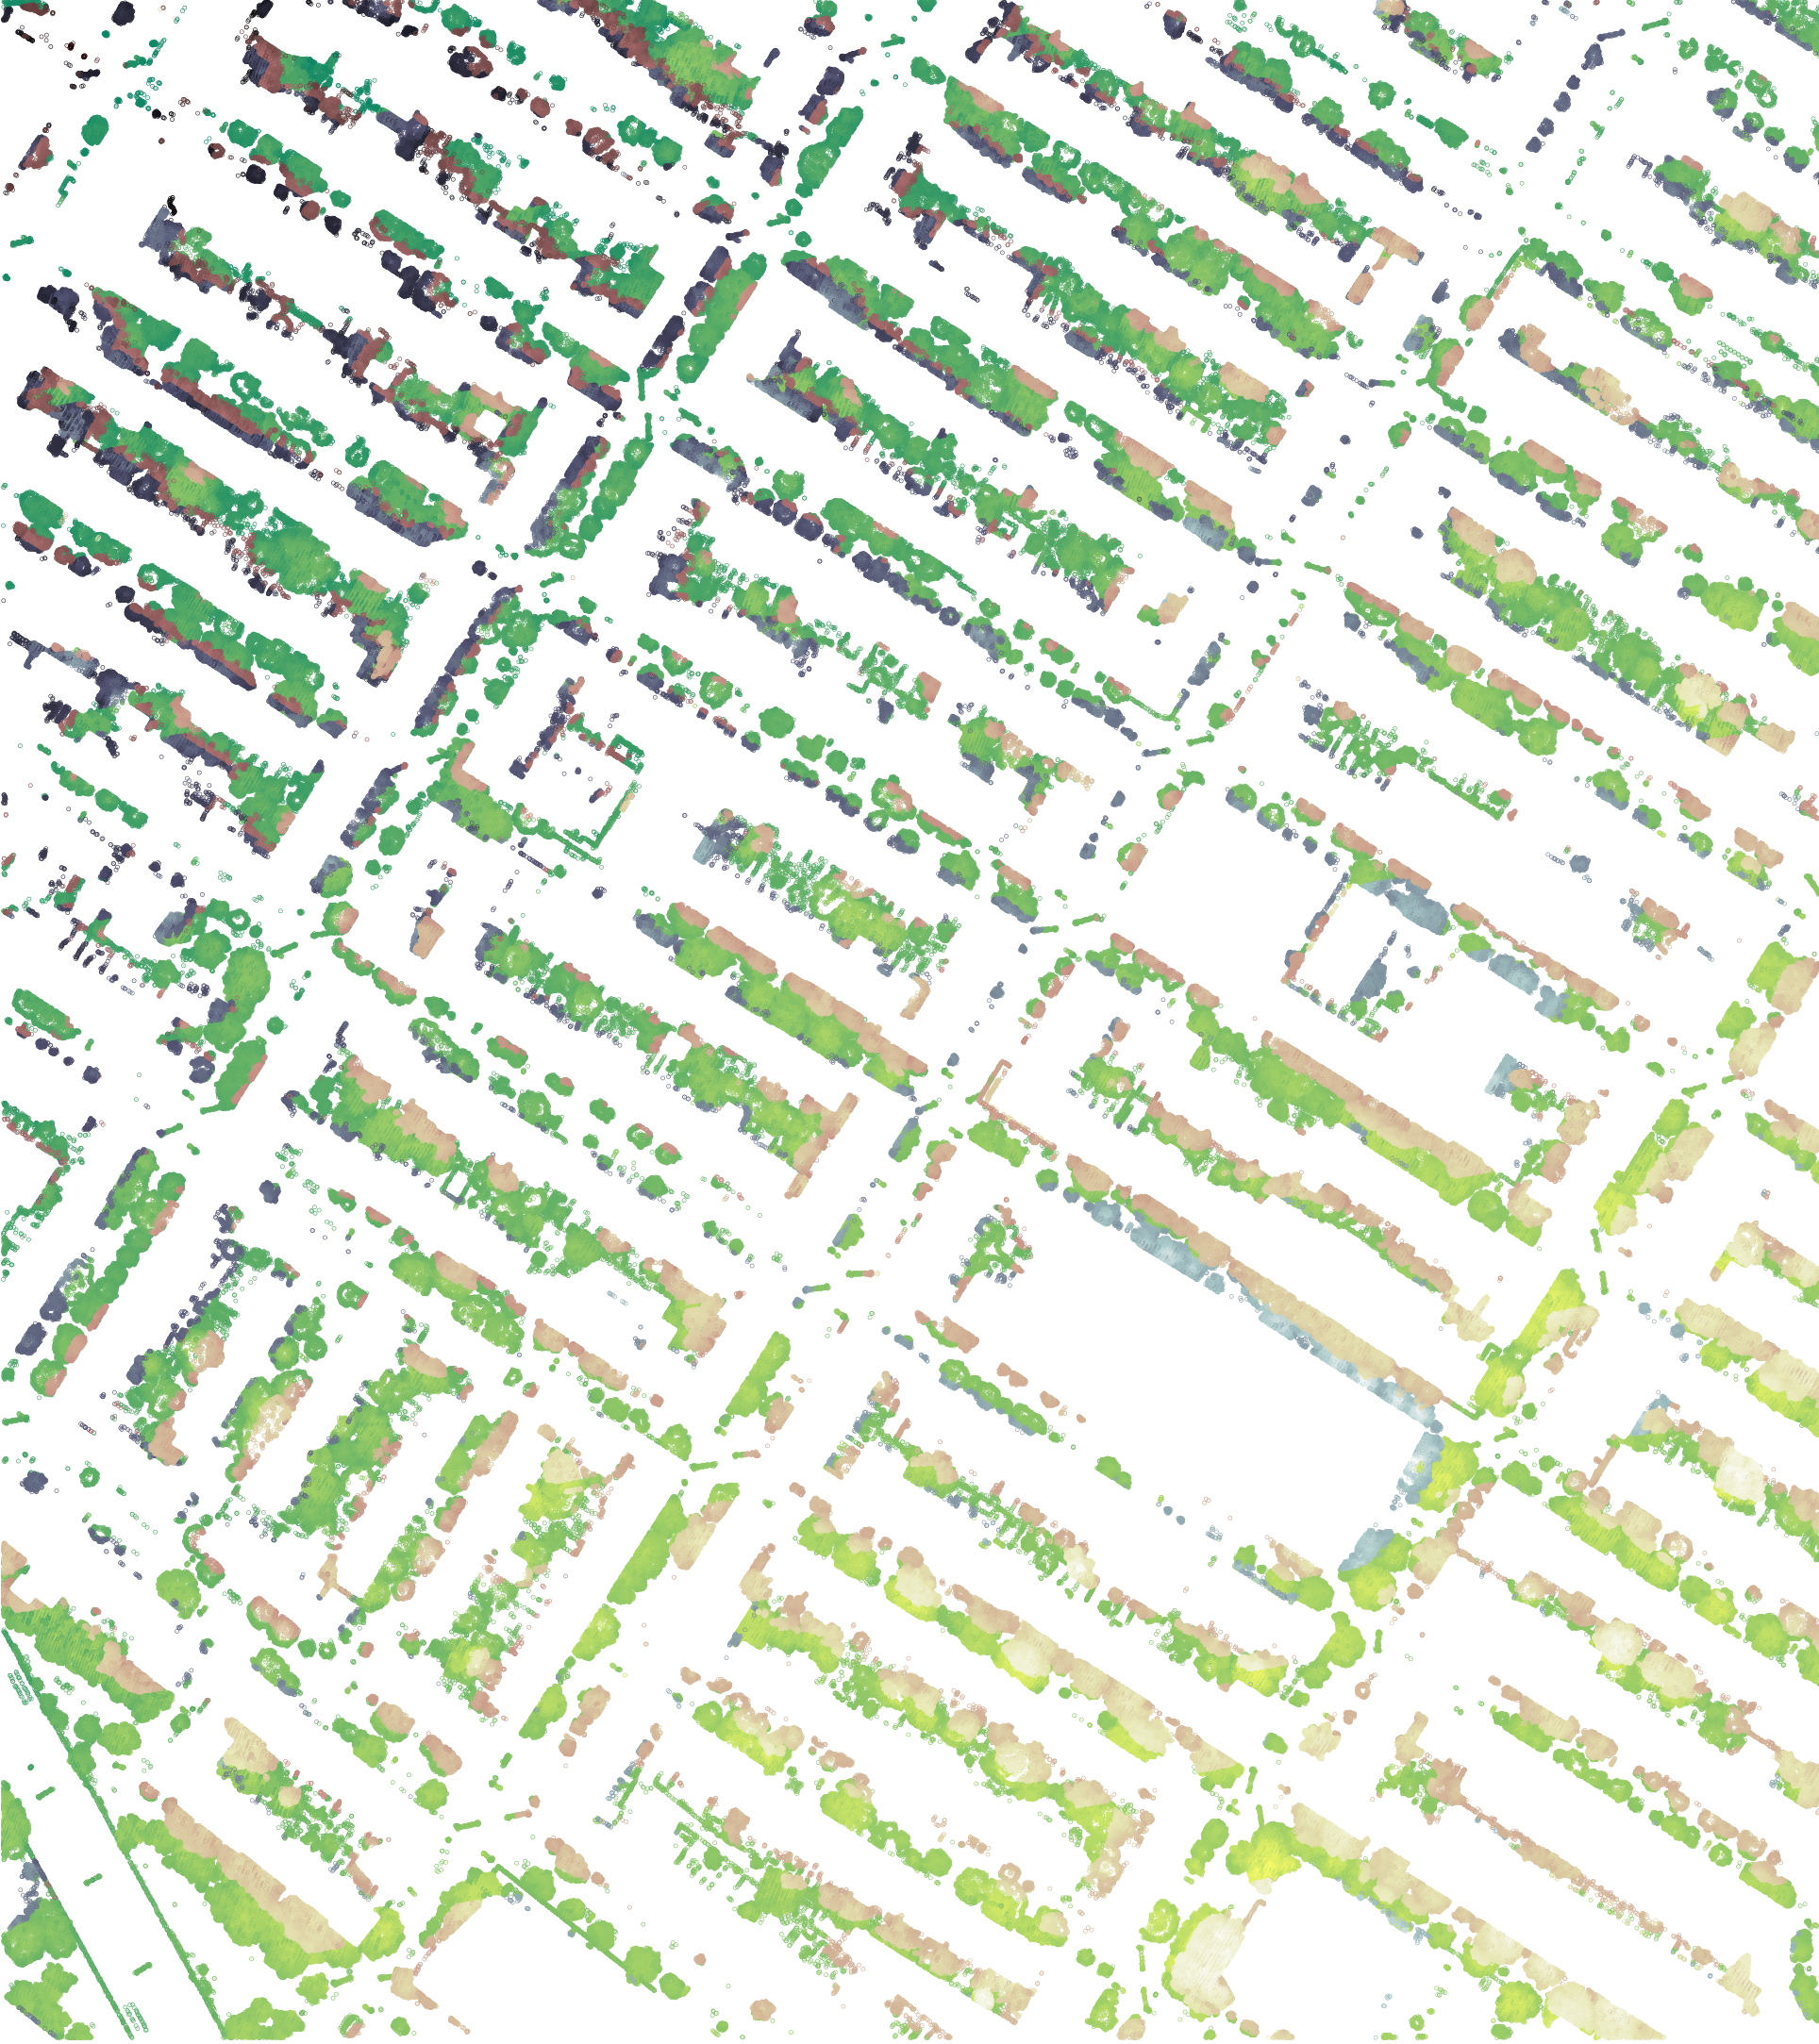 Image of tree canopies of Park Slope in Brooklyn, NYC